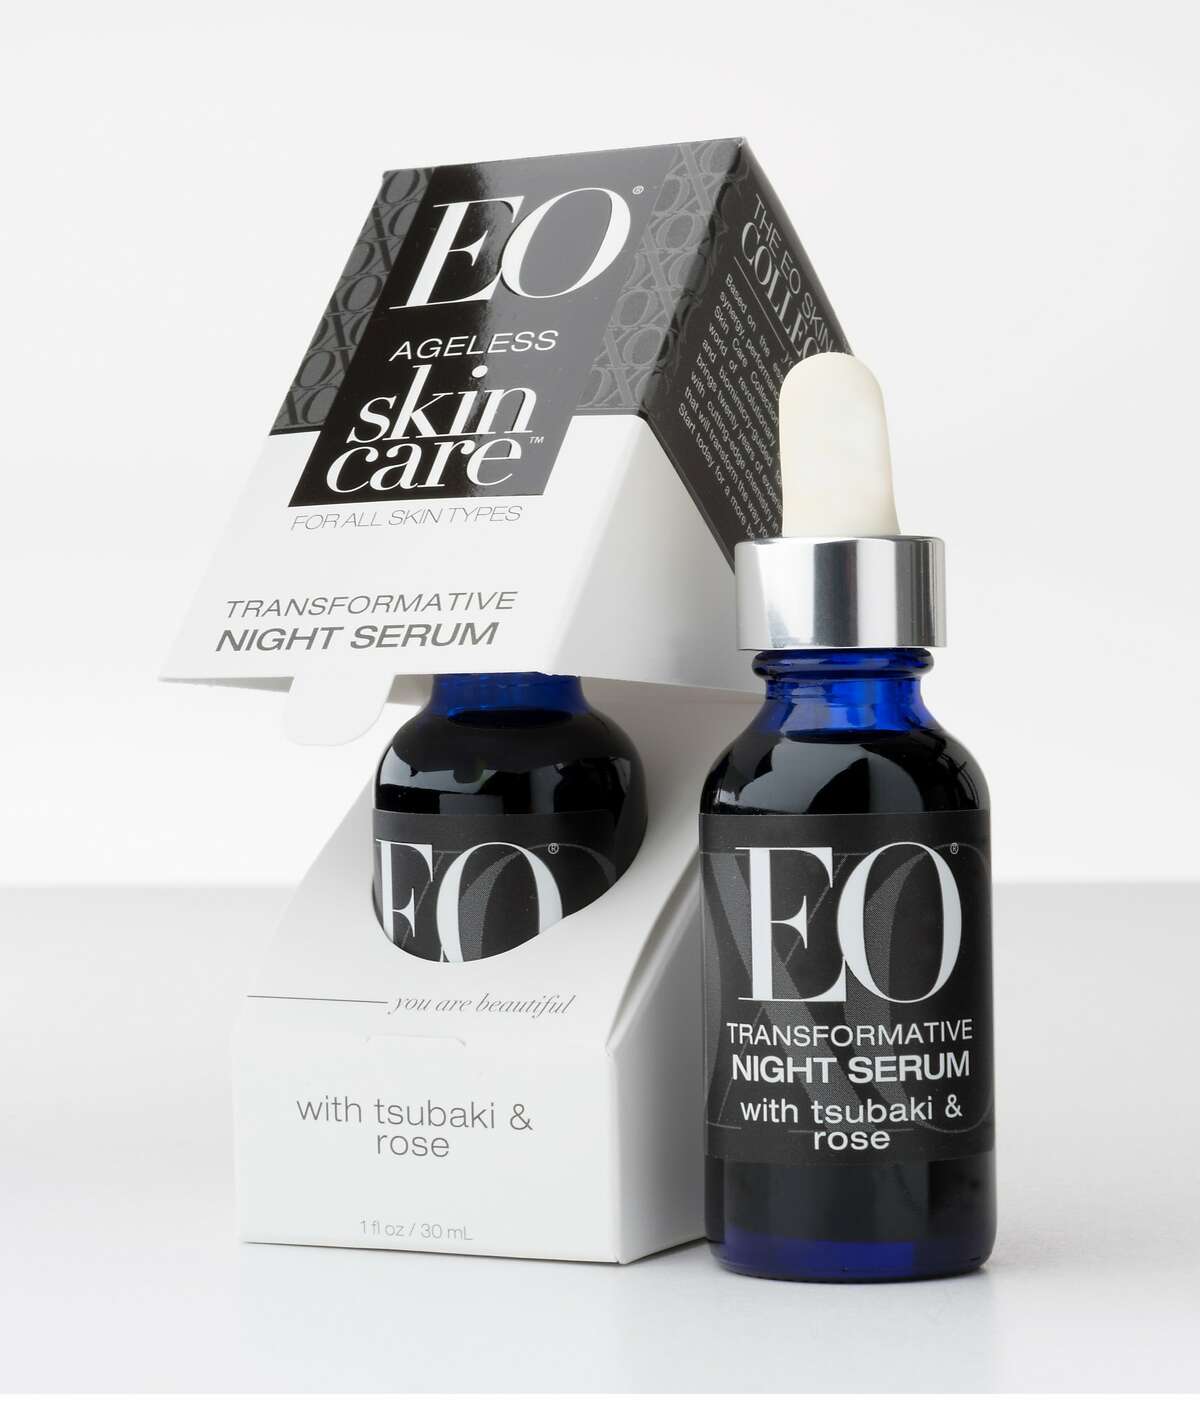 EO Products Ageless Skin Care Transformative Night Serum with Tsubaki and Rose. Available at www.eoproducts.com.